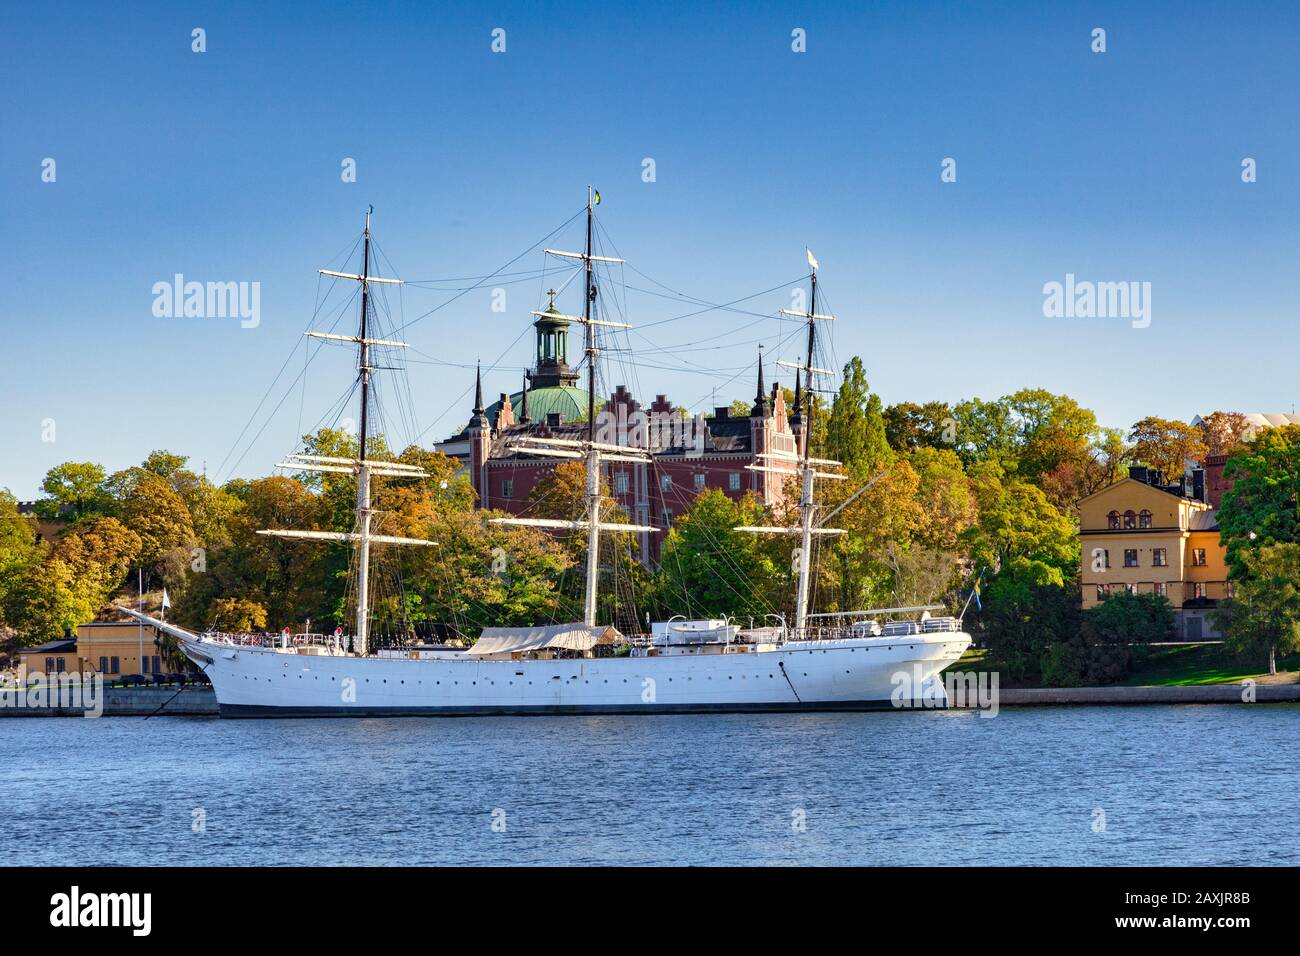 16 September 2018: Stockholm, Sweden - AF Chapman,  a full-rigged steel ship moored on the western shore of the islet Skeppsholmen, which acts as a... Stock Photo